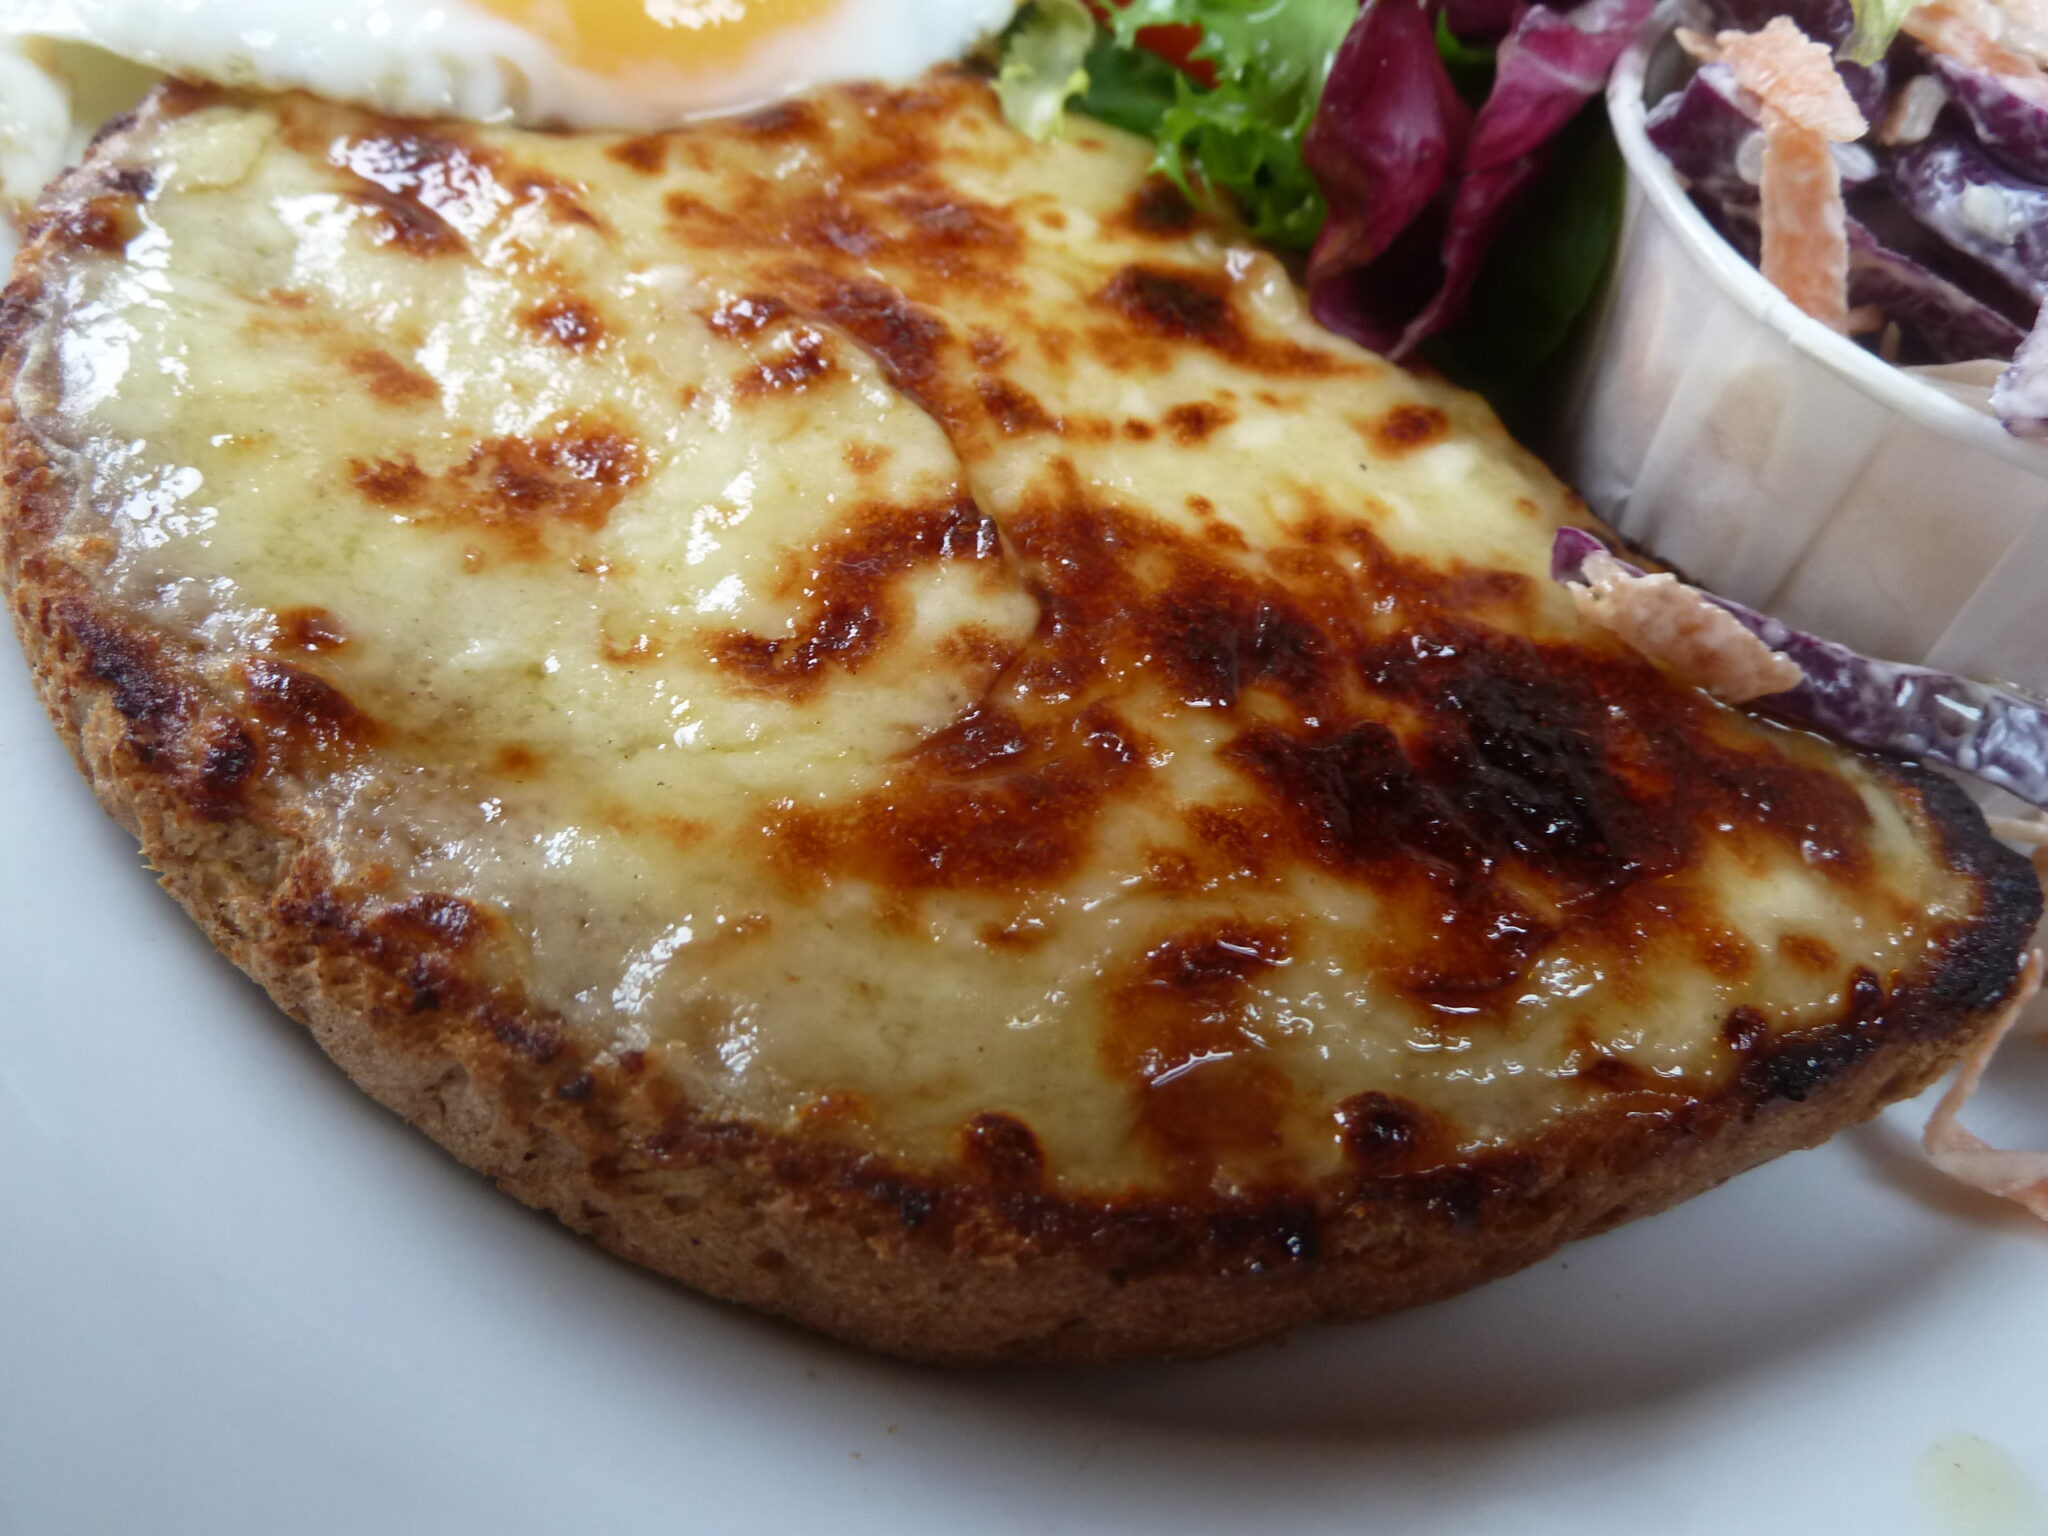 where does the word rarebit come from and what does rarebit mean